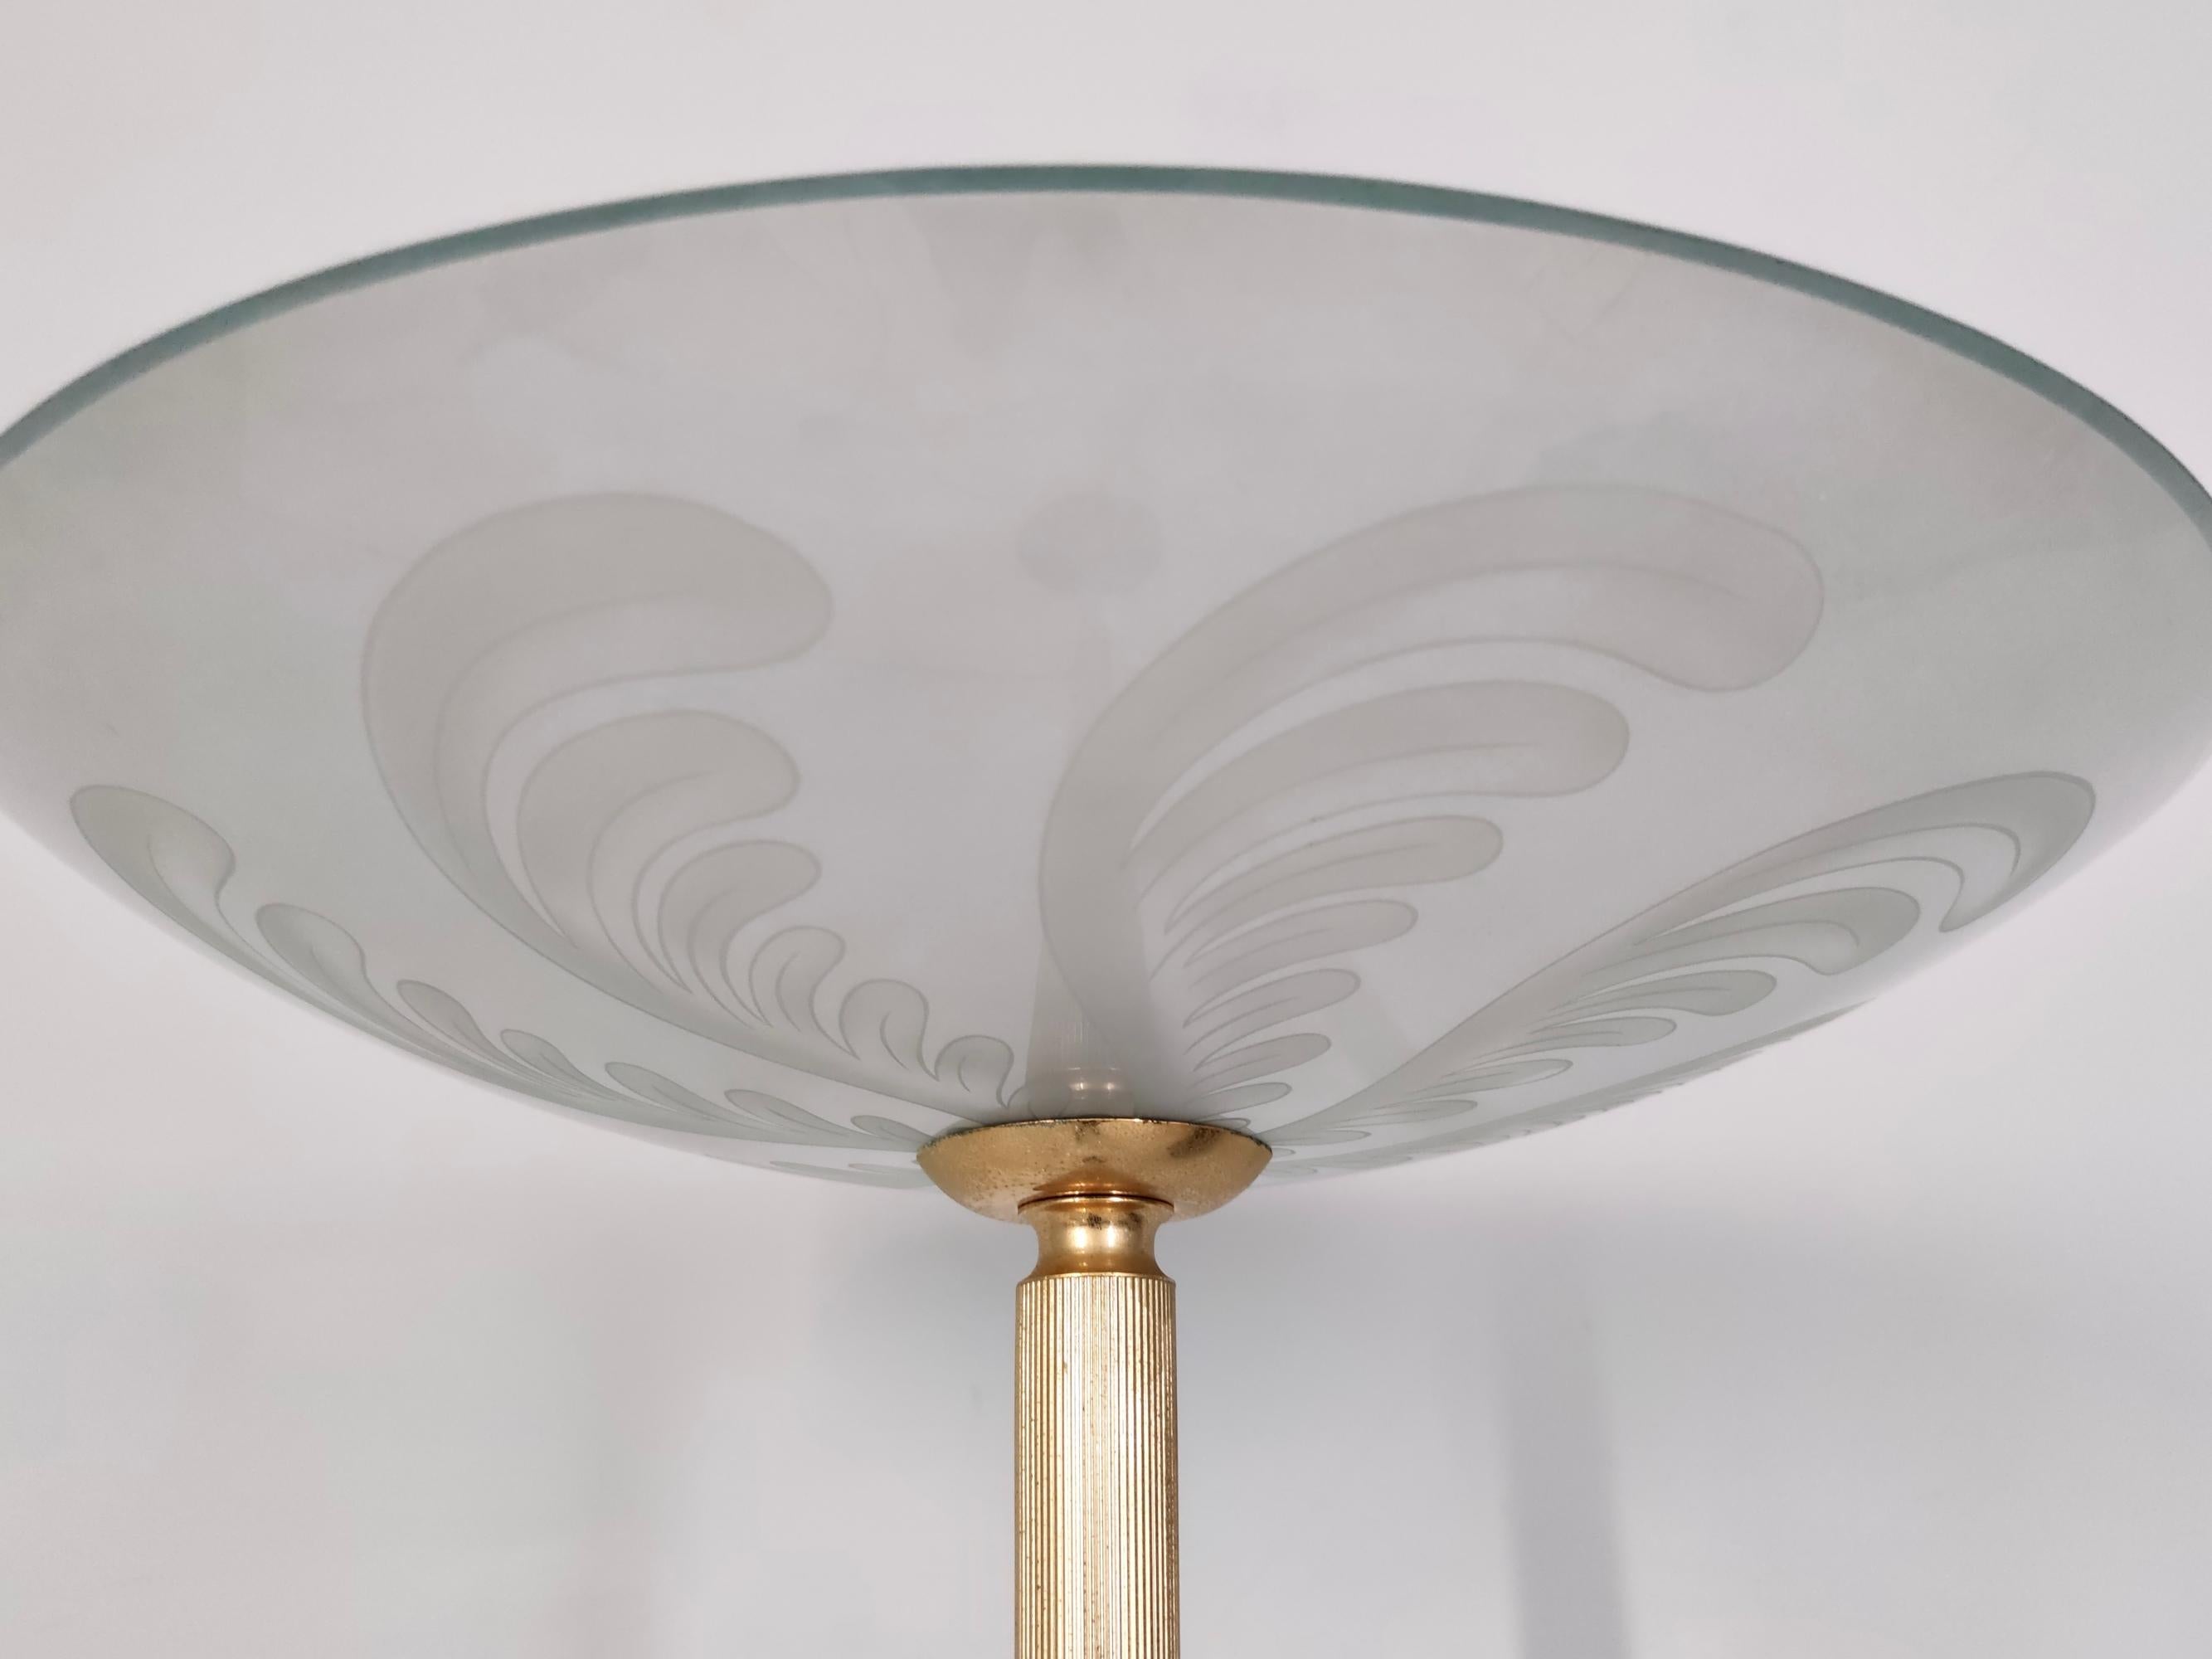 Mid-20th Century Vintage Brass and Etched Glass Floor Lamp in the style of Fontana Arte, Italy For Sale